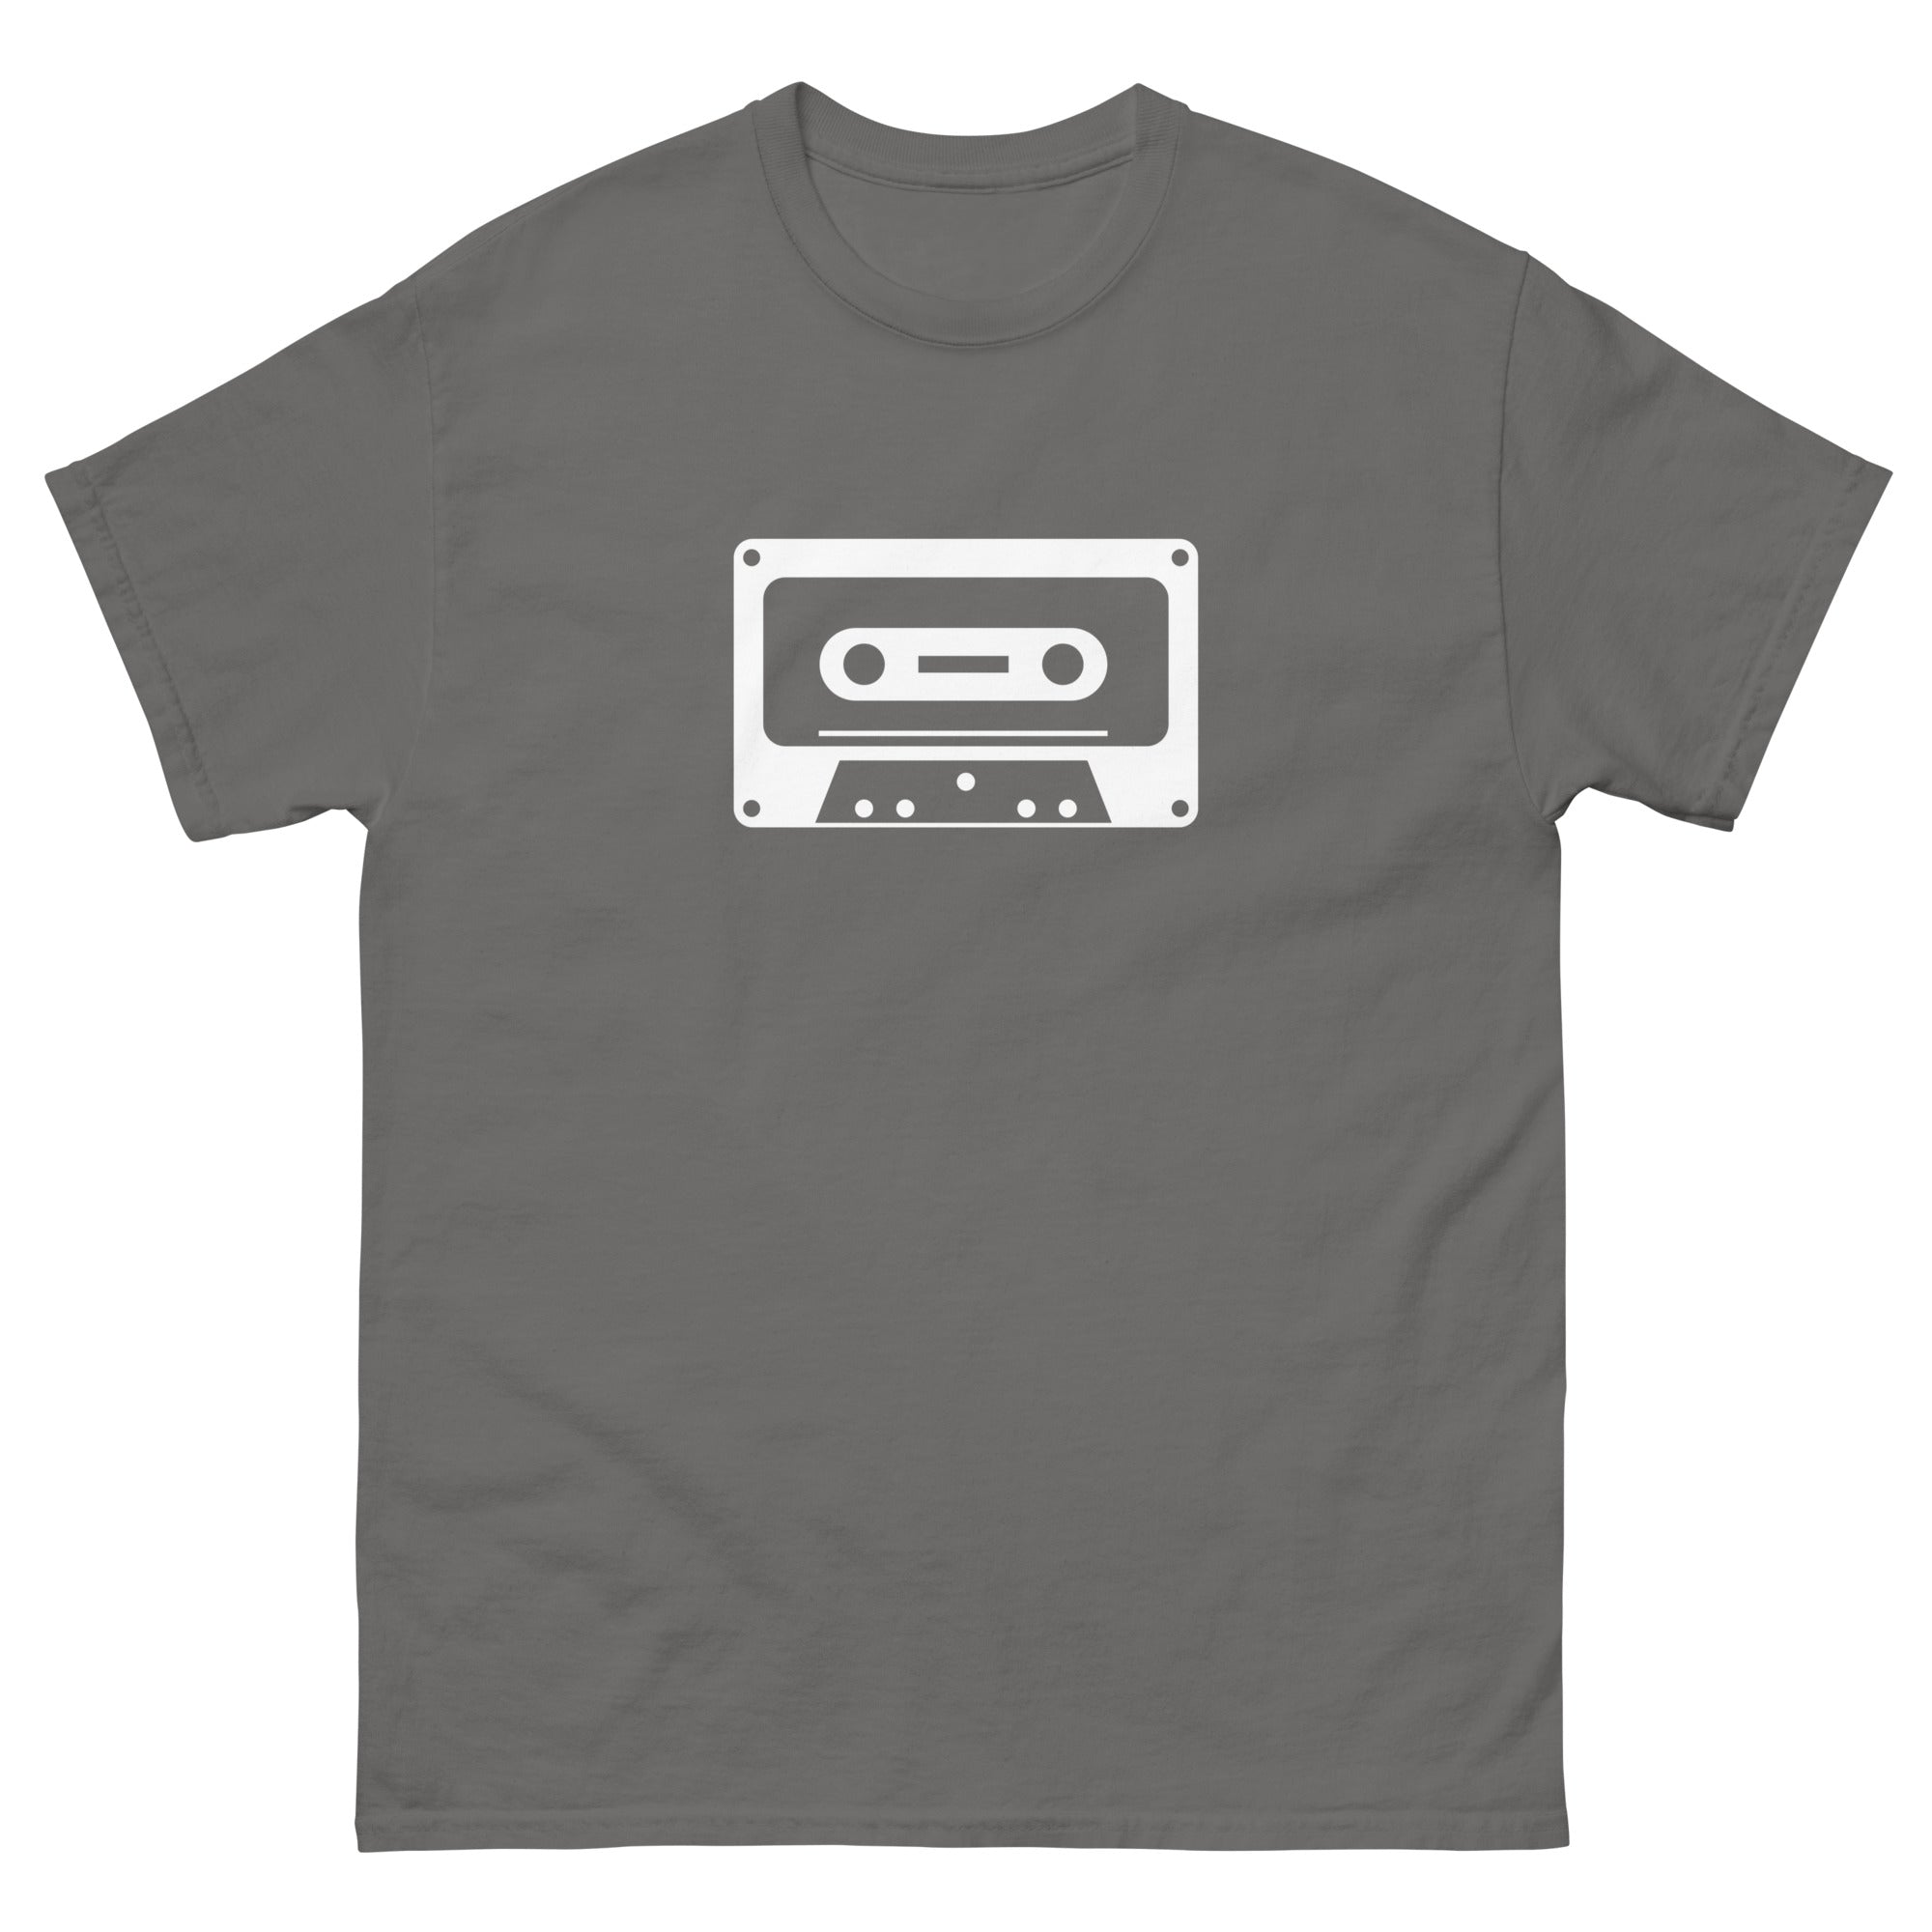 Bruddaales Tape Shirt (DS)